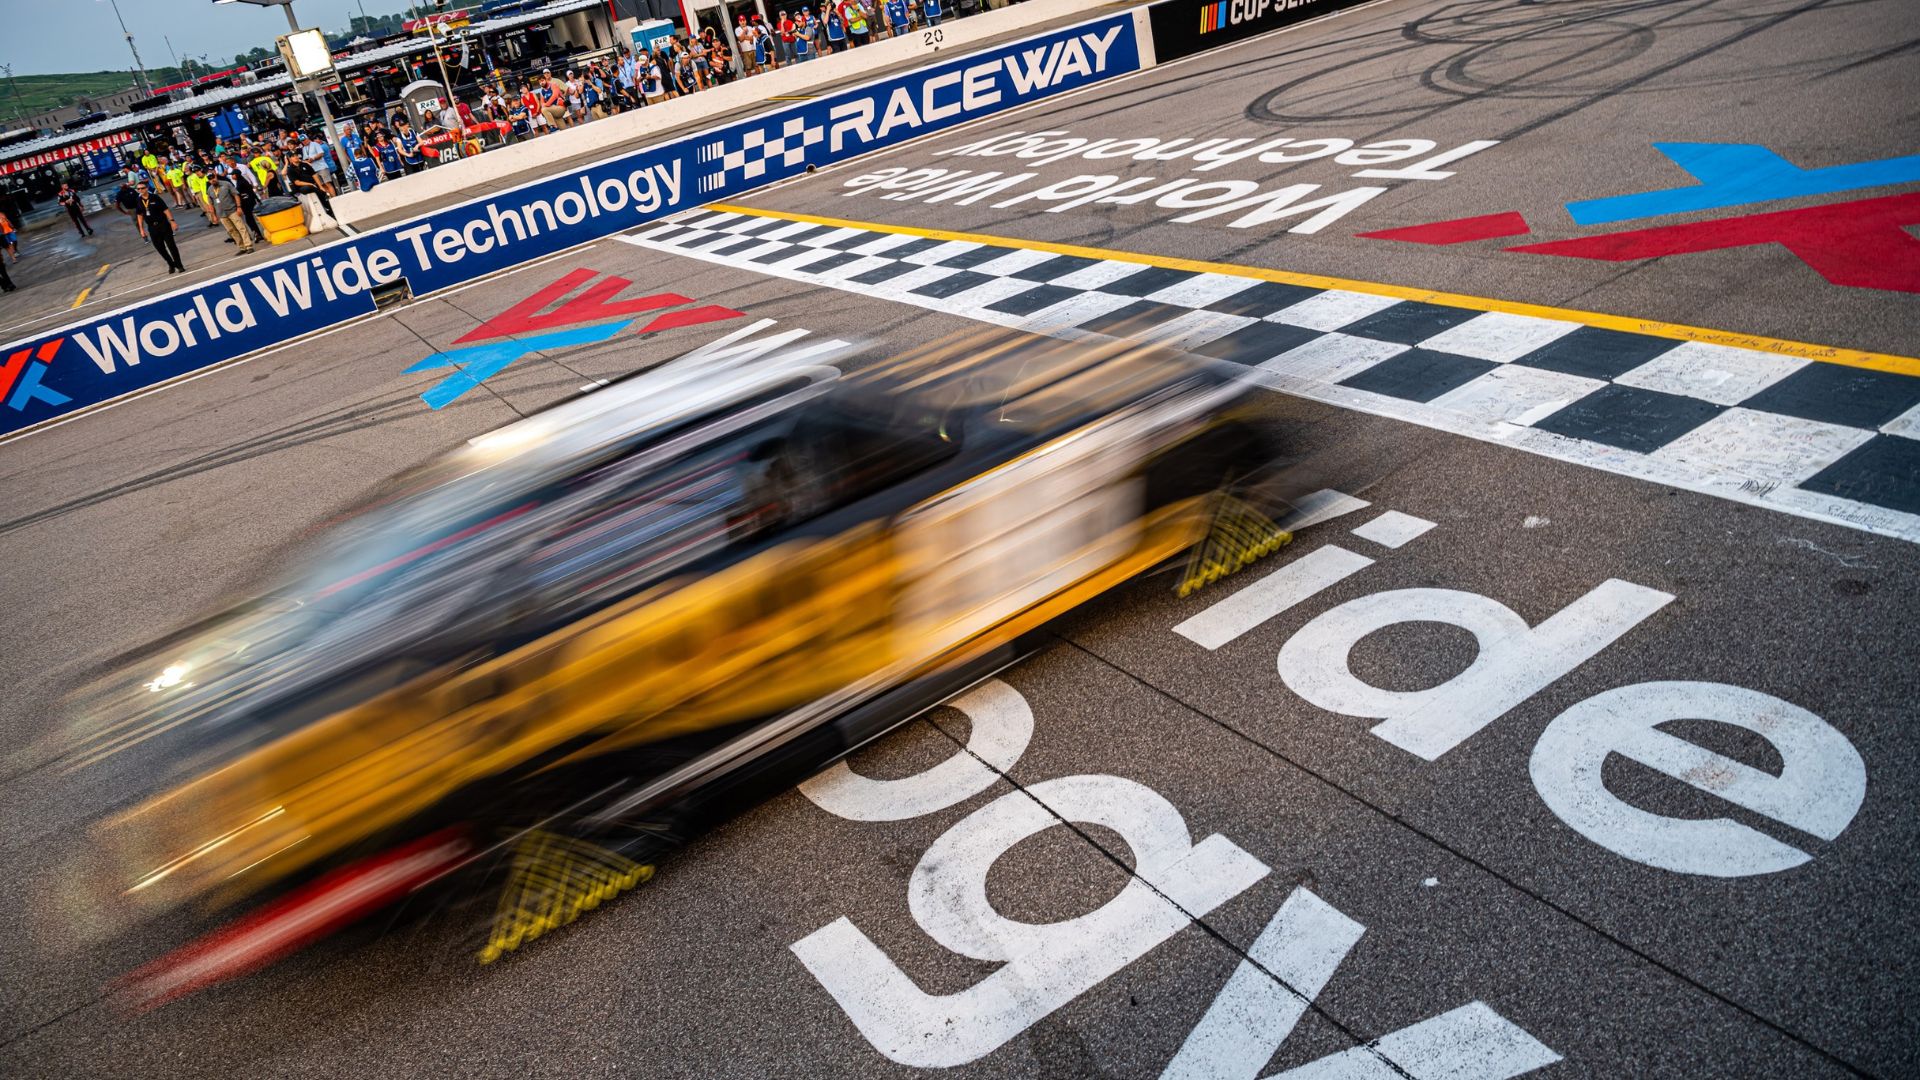 A car races across the finish line during a NASCAR Cup Series race at World Wide Technology Raceway.